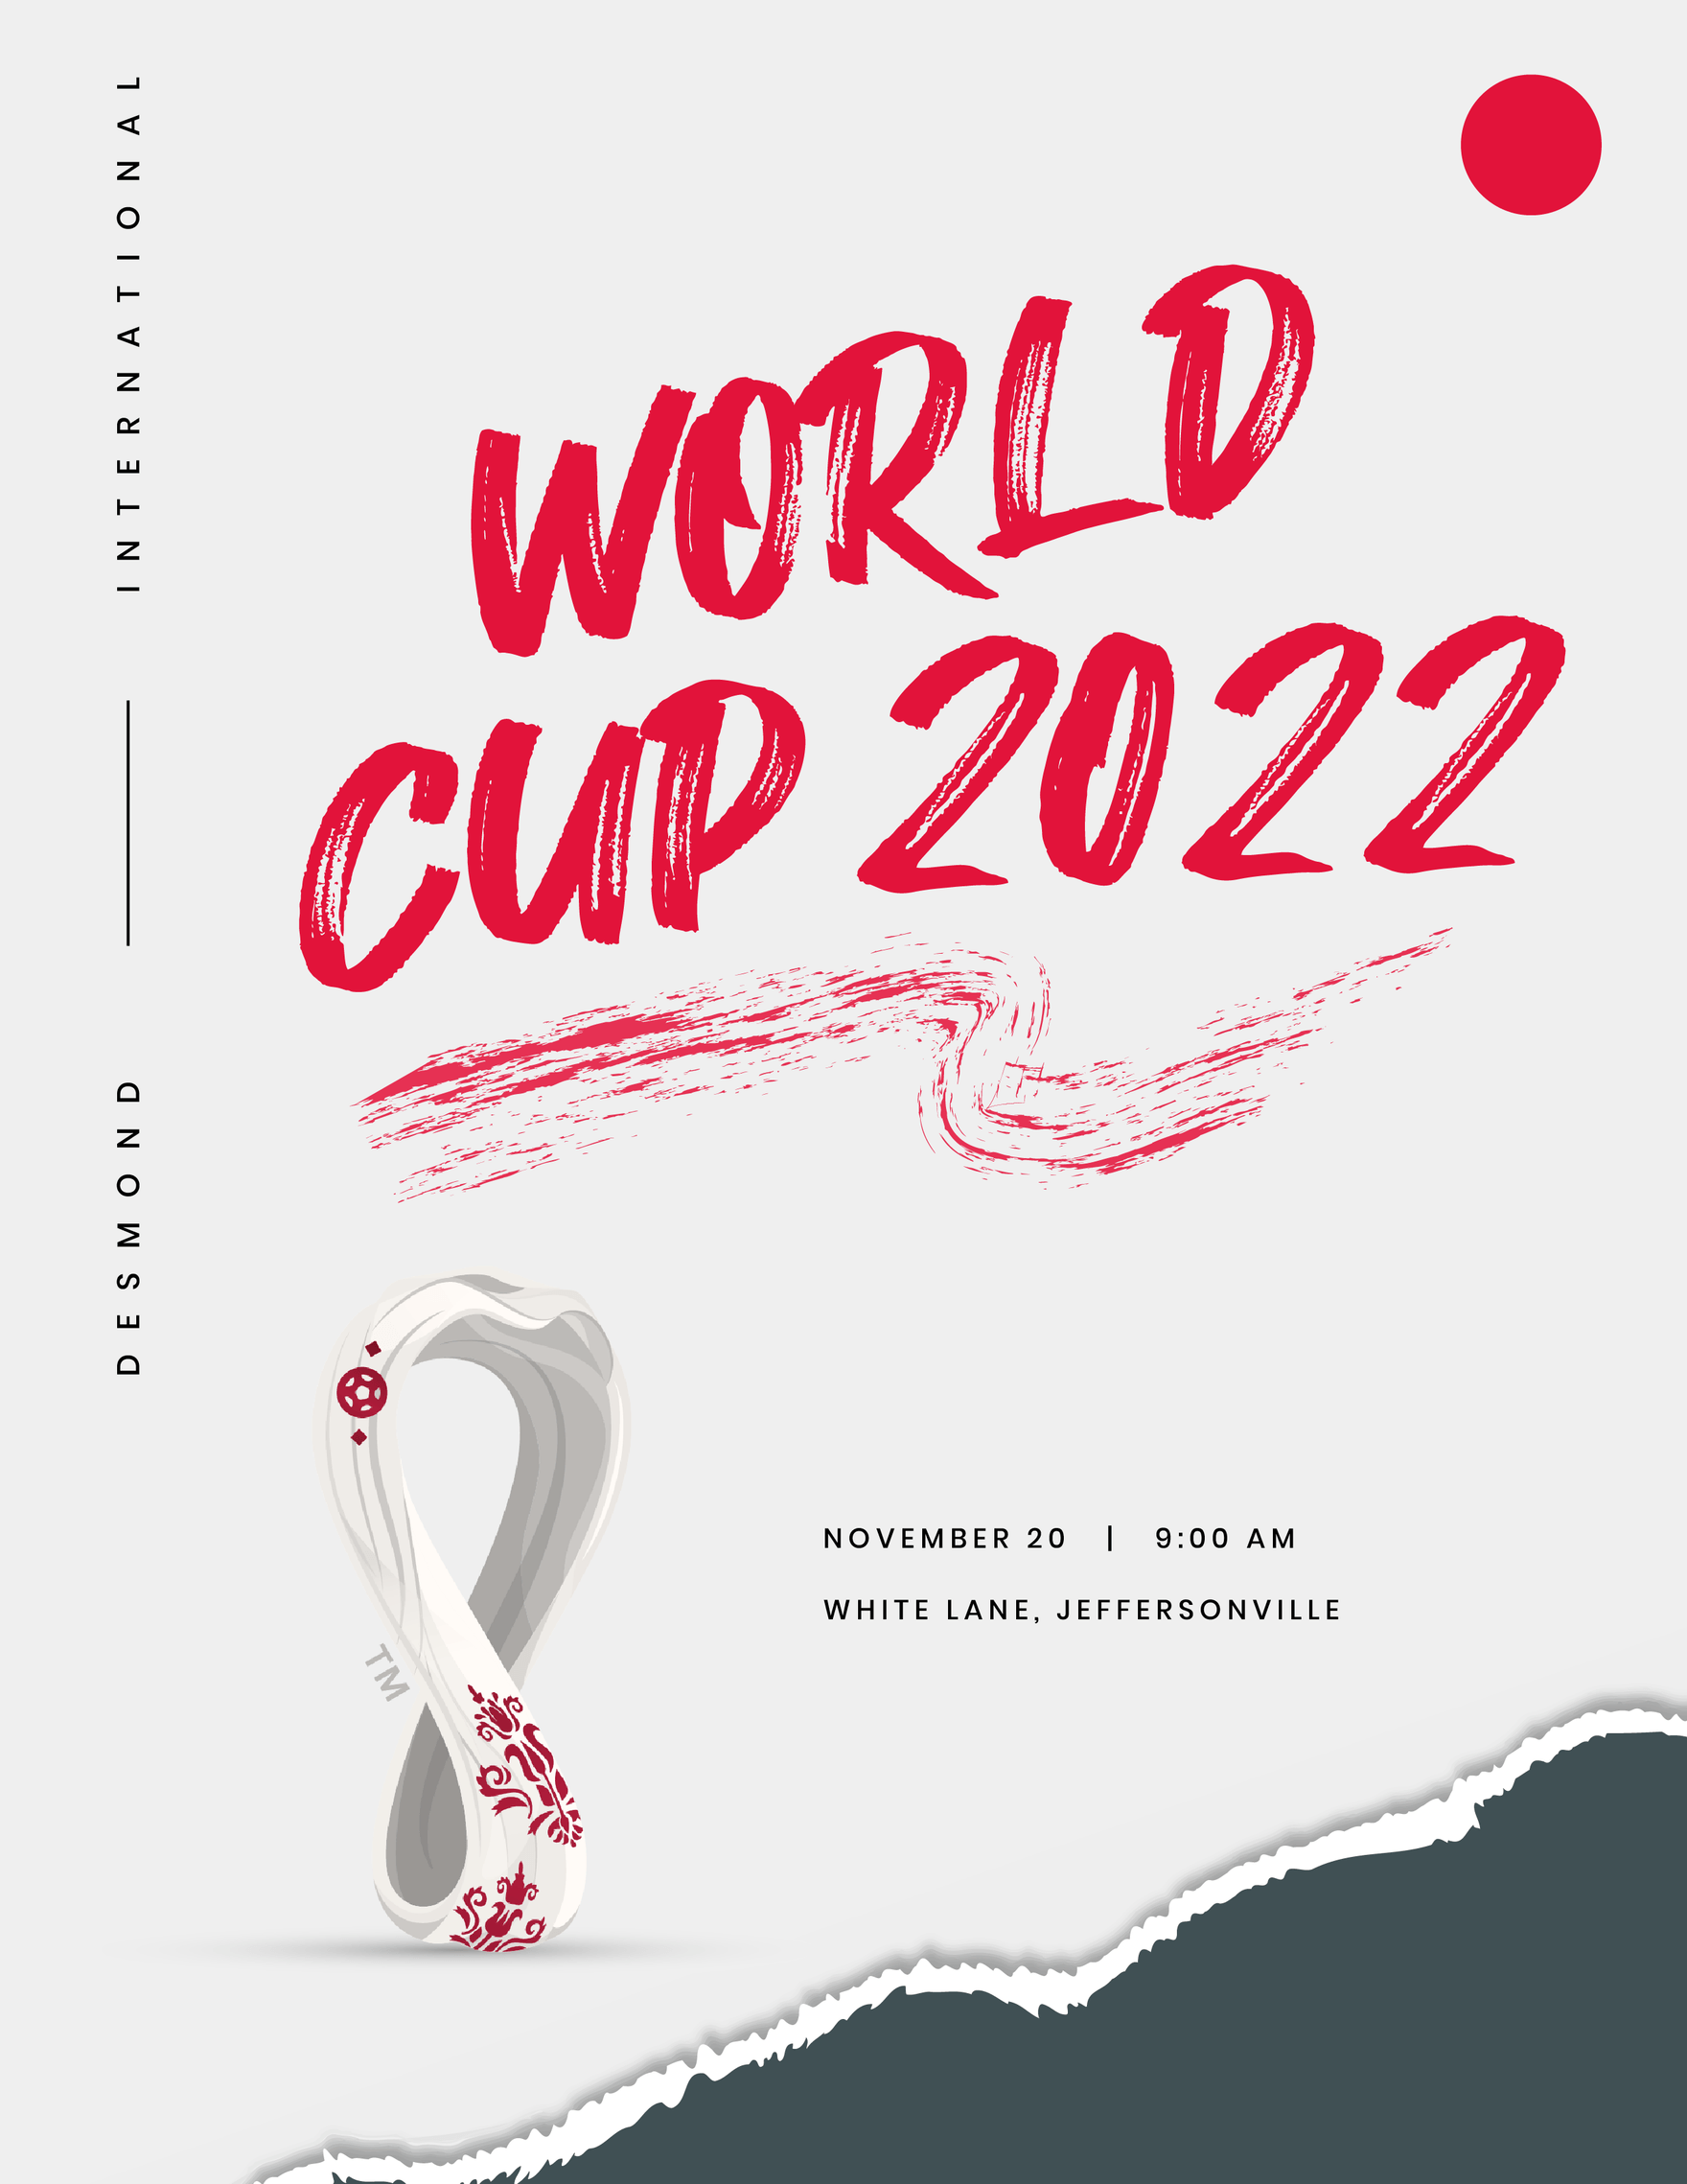 World Cup 2022 Event Flyer in Word, Google Docs, Illustrator, PSD, Apple Pages, Publisher, EPS, PNG